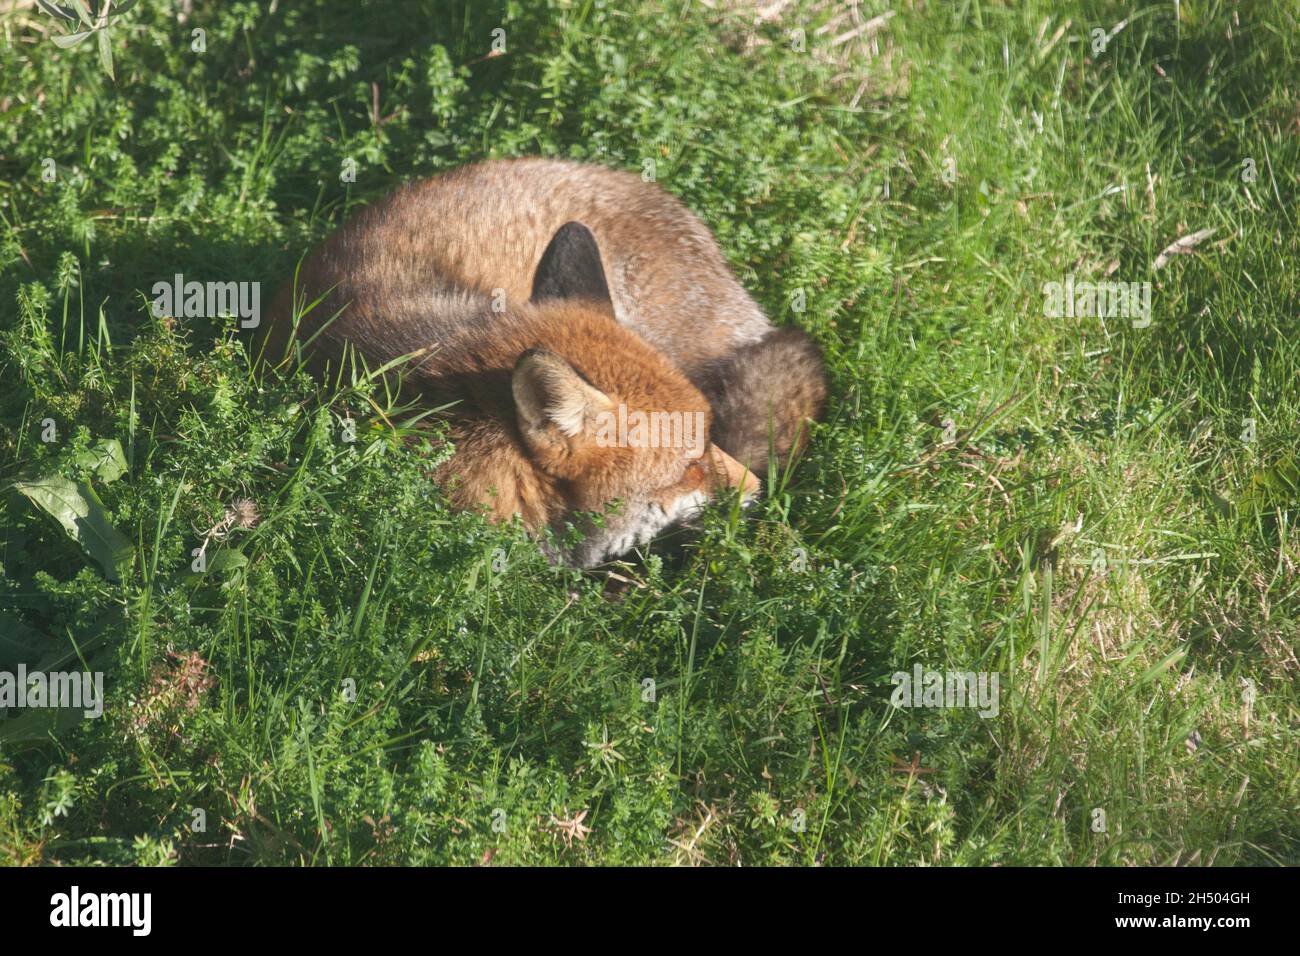 UK weather, London, 5 November 2021: An urban fox enjoys the sunny weather by taking an afternoon nap in a garden in Clapham, South London. Credit: Anna Watson/Alamy Live News Stock Photo